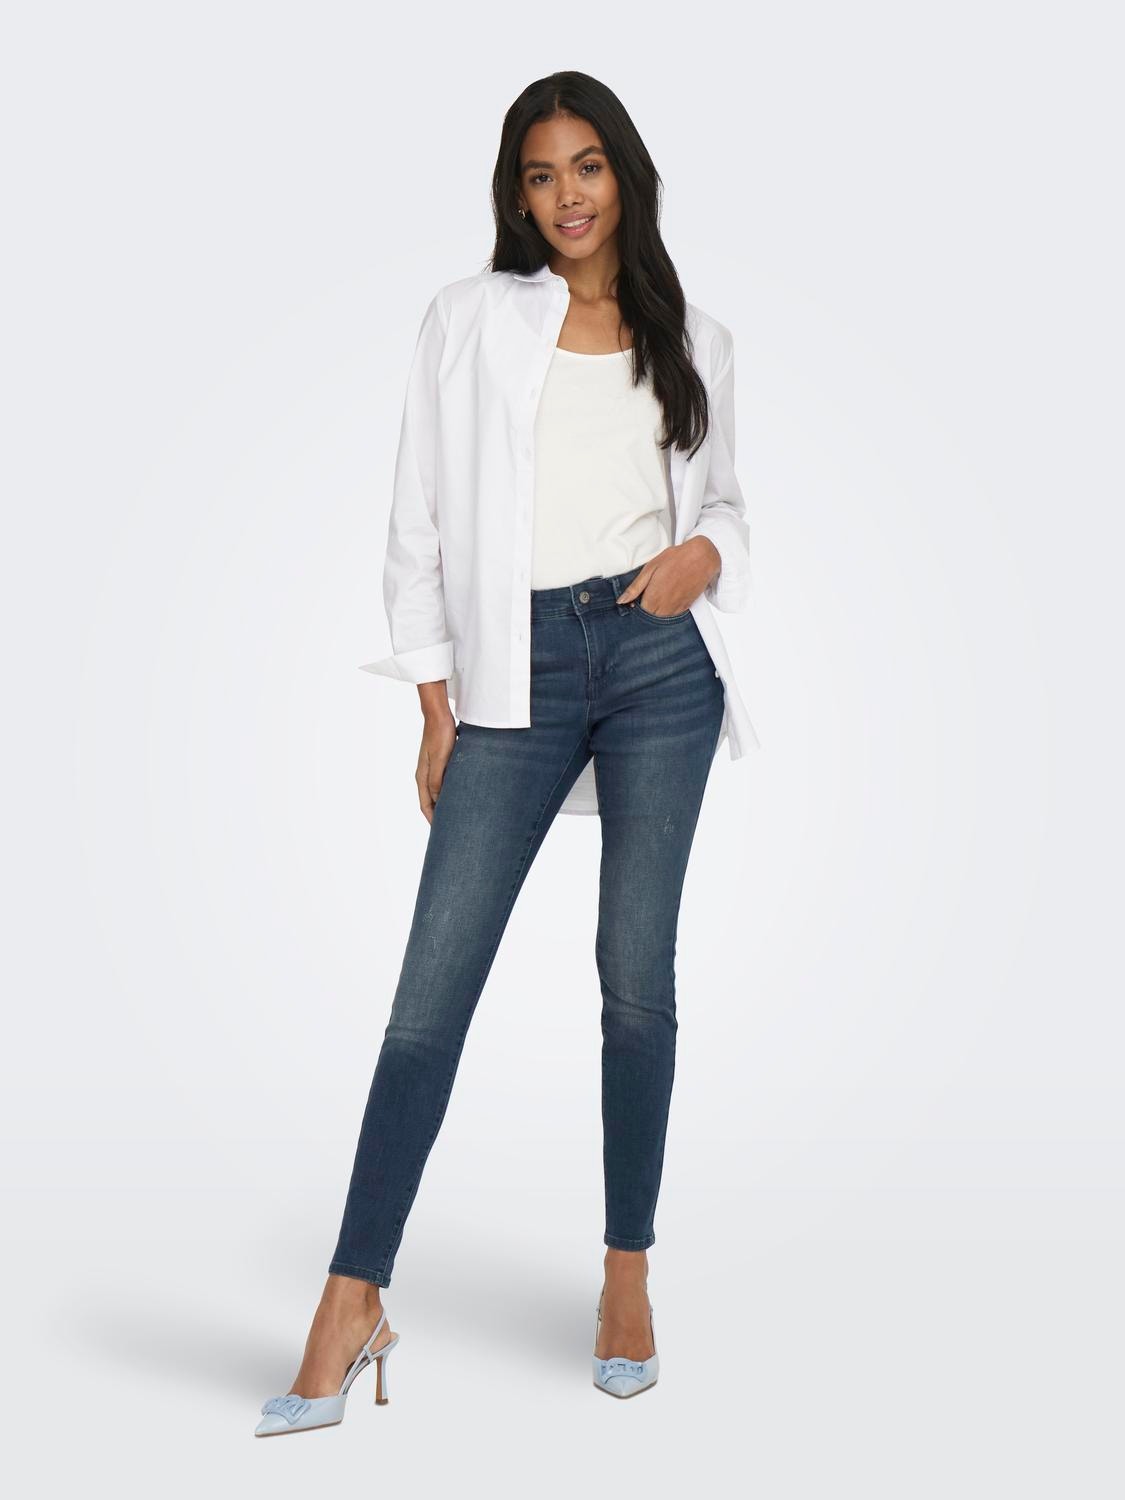 ONLY Jeans Skinny Fit Taille moyenne -Blue Black Denim - 15233288